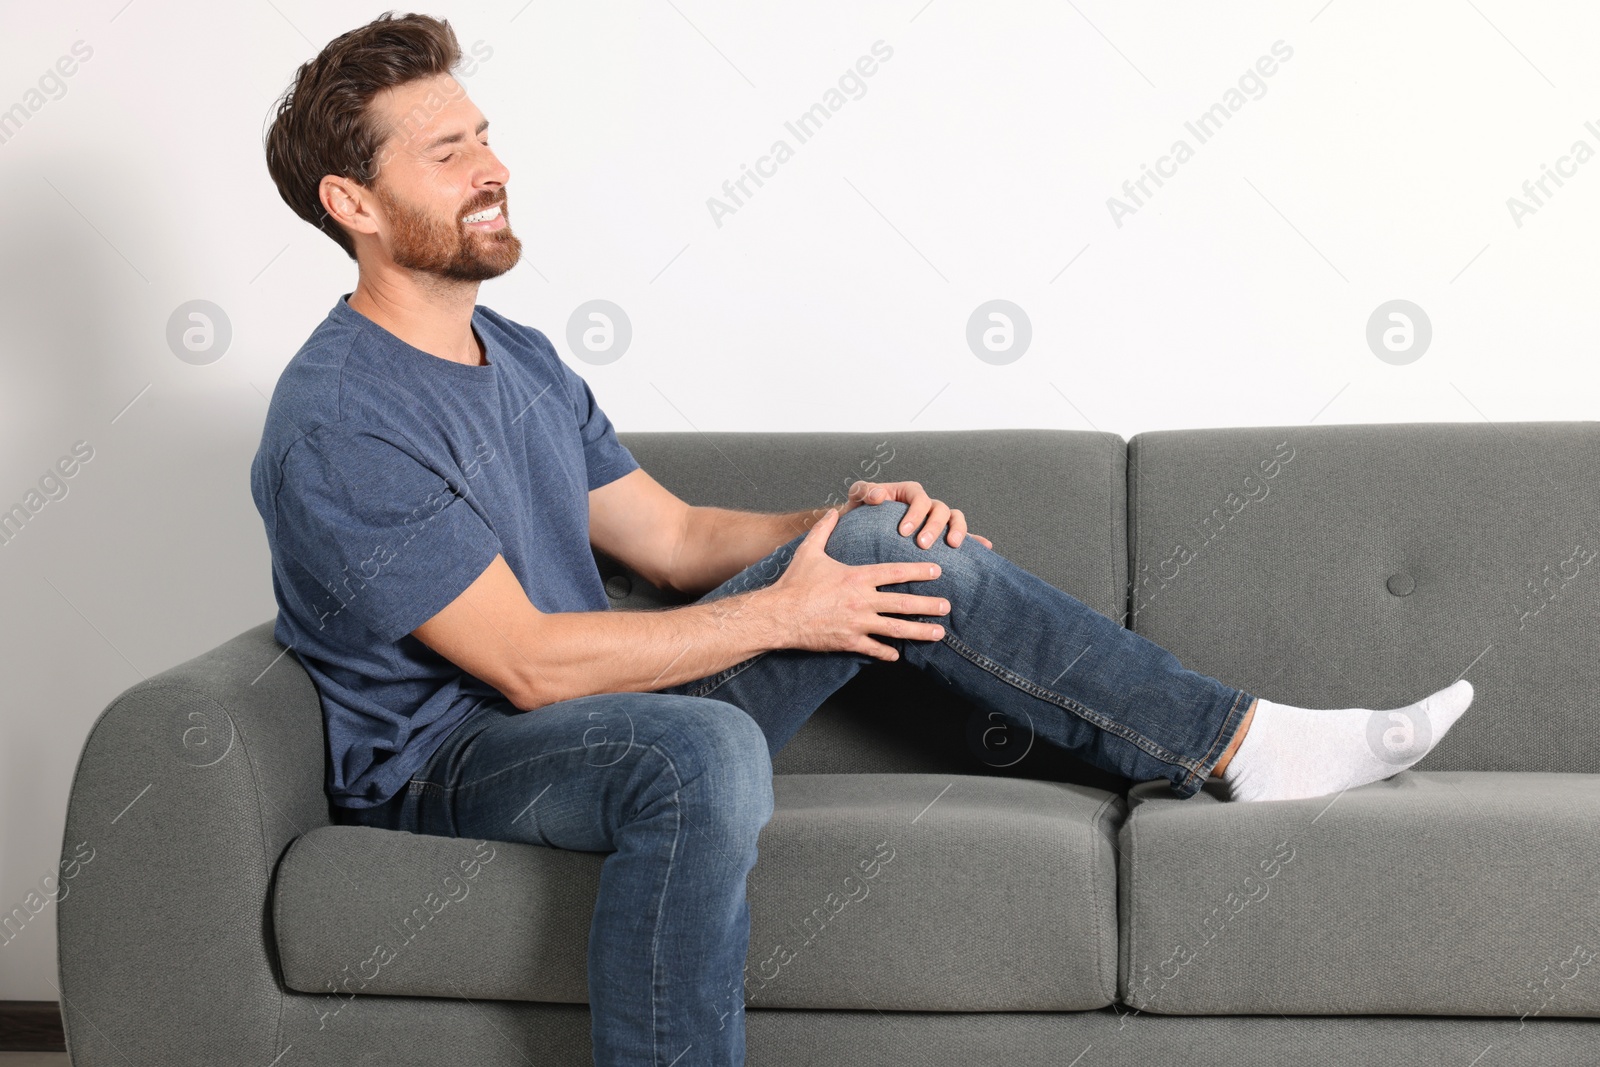 Photo of Man suffering from leg pain and touching knee on sofa indoors